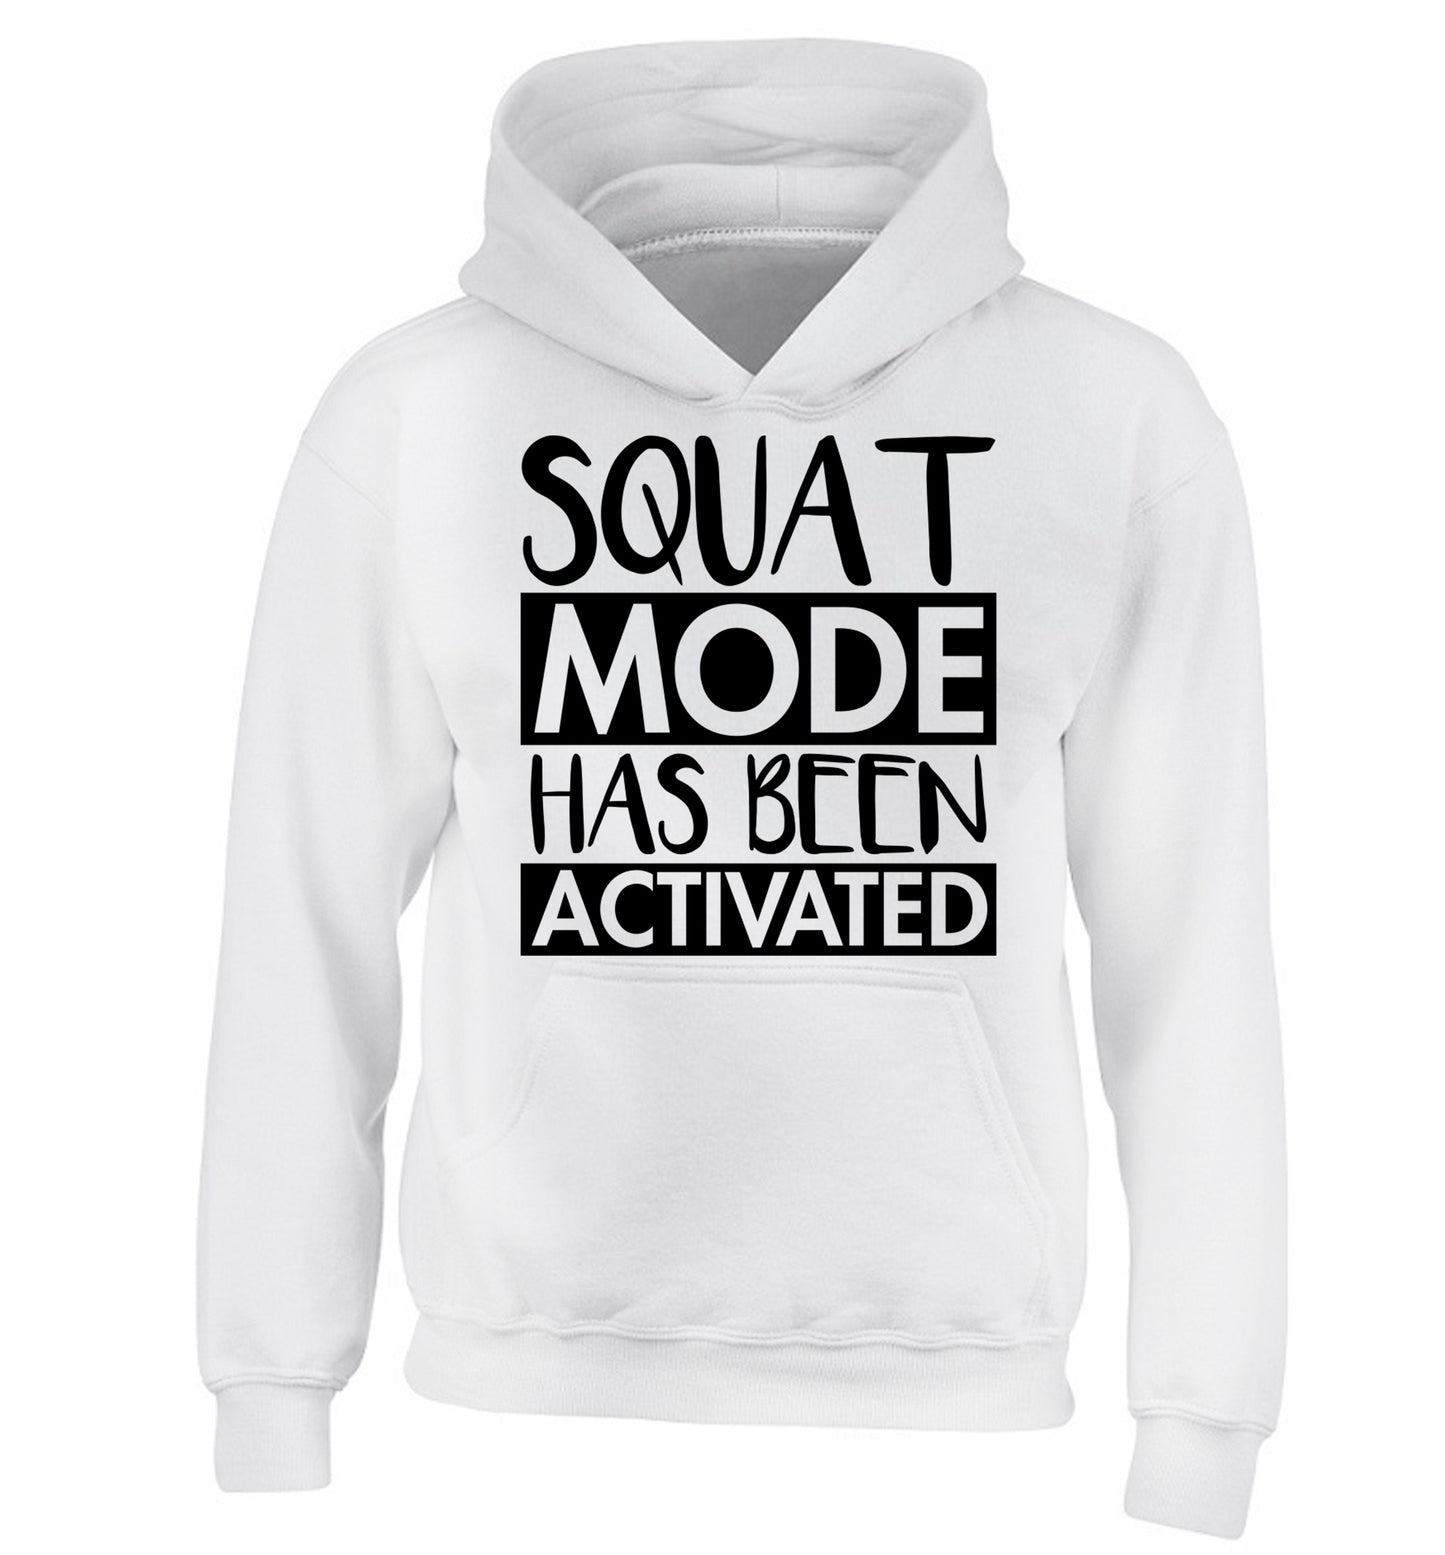 Squat mode activated children's white hoodie 12-14 Years